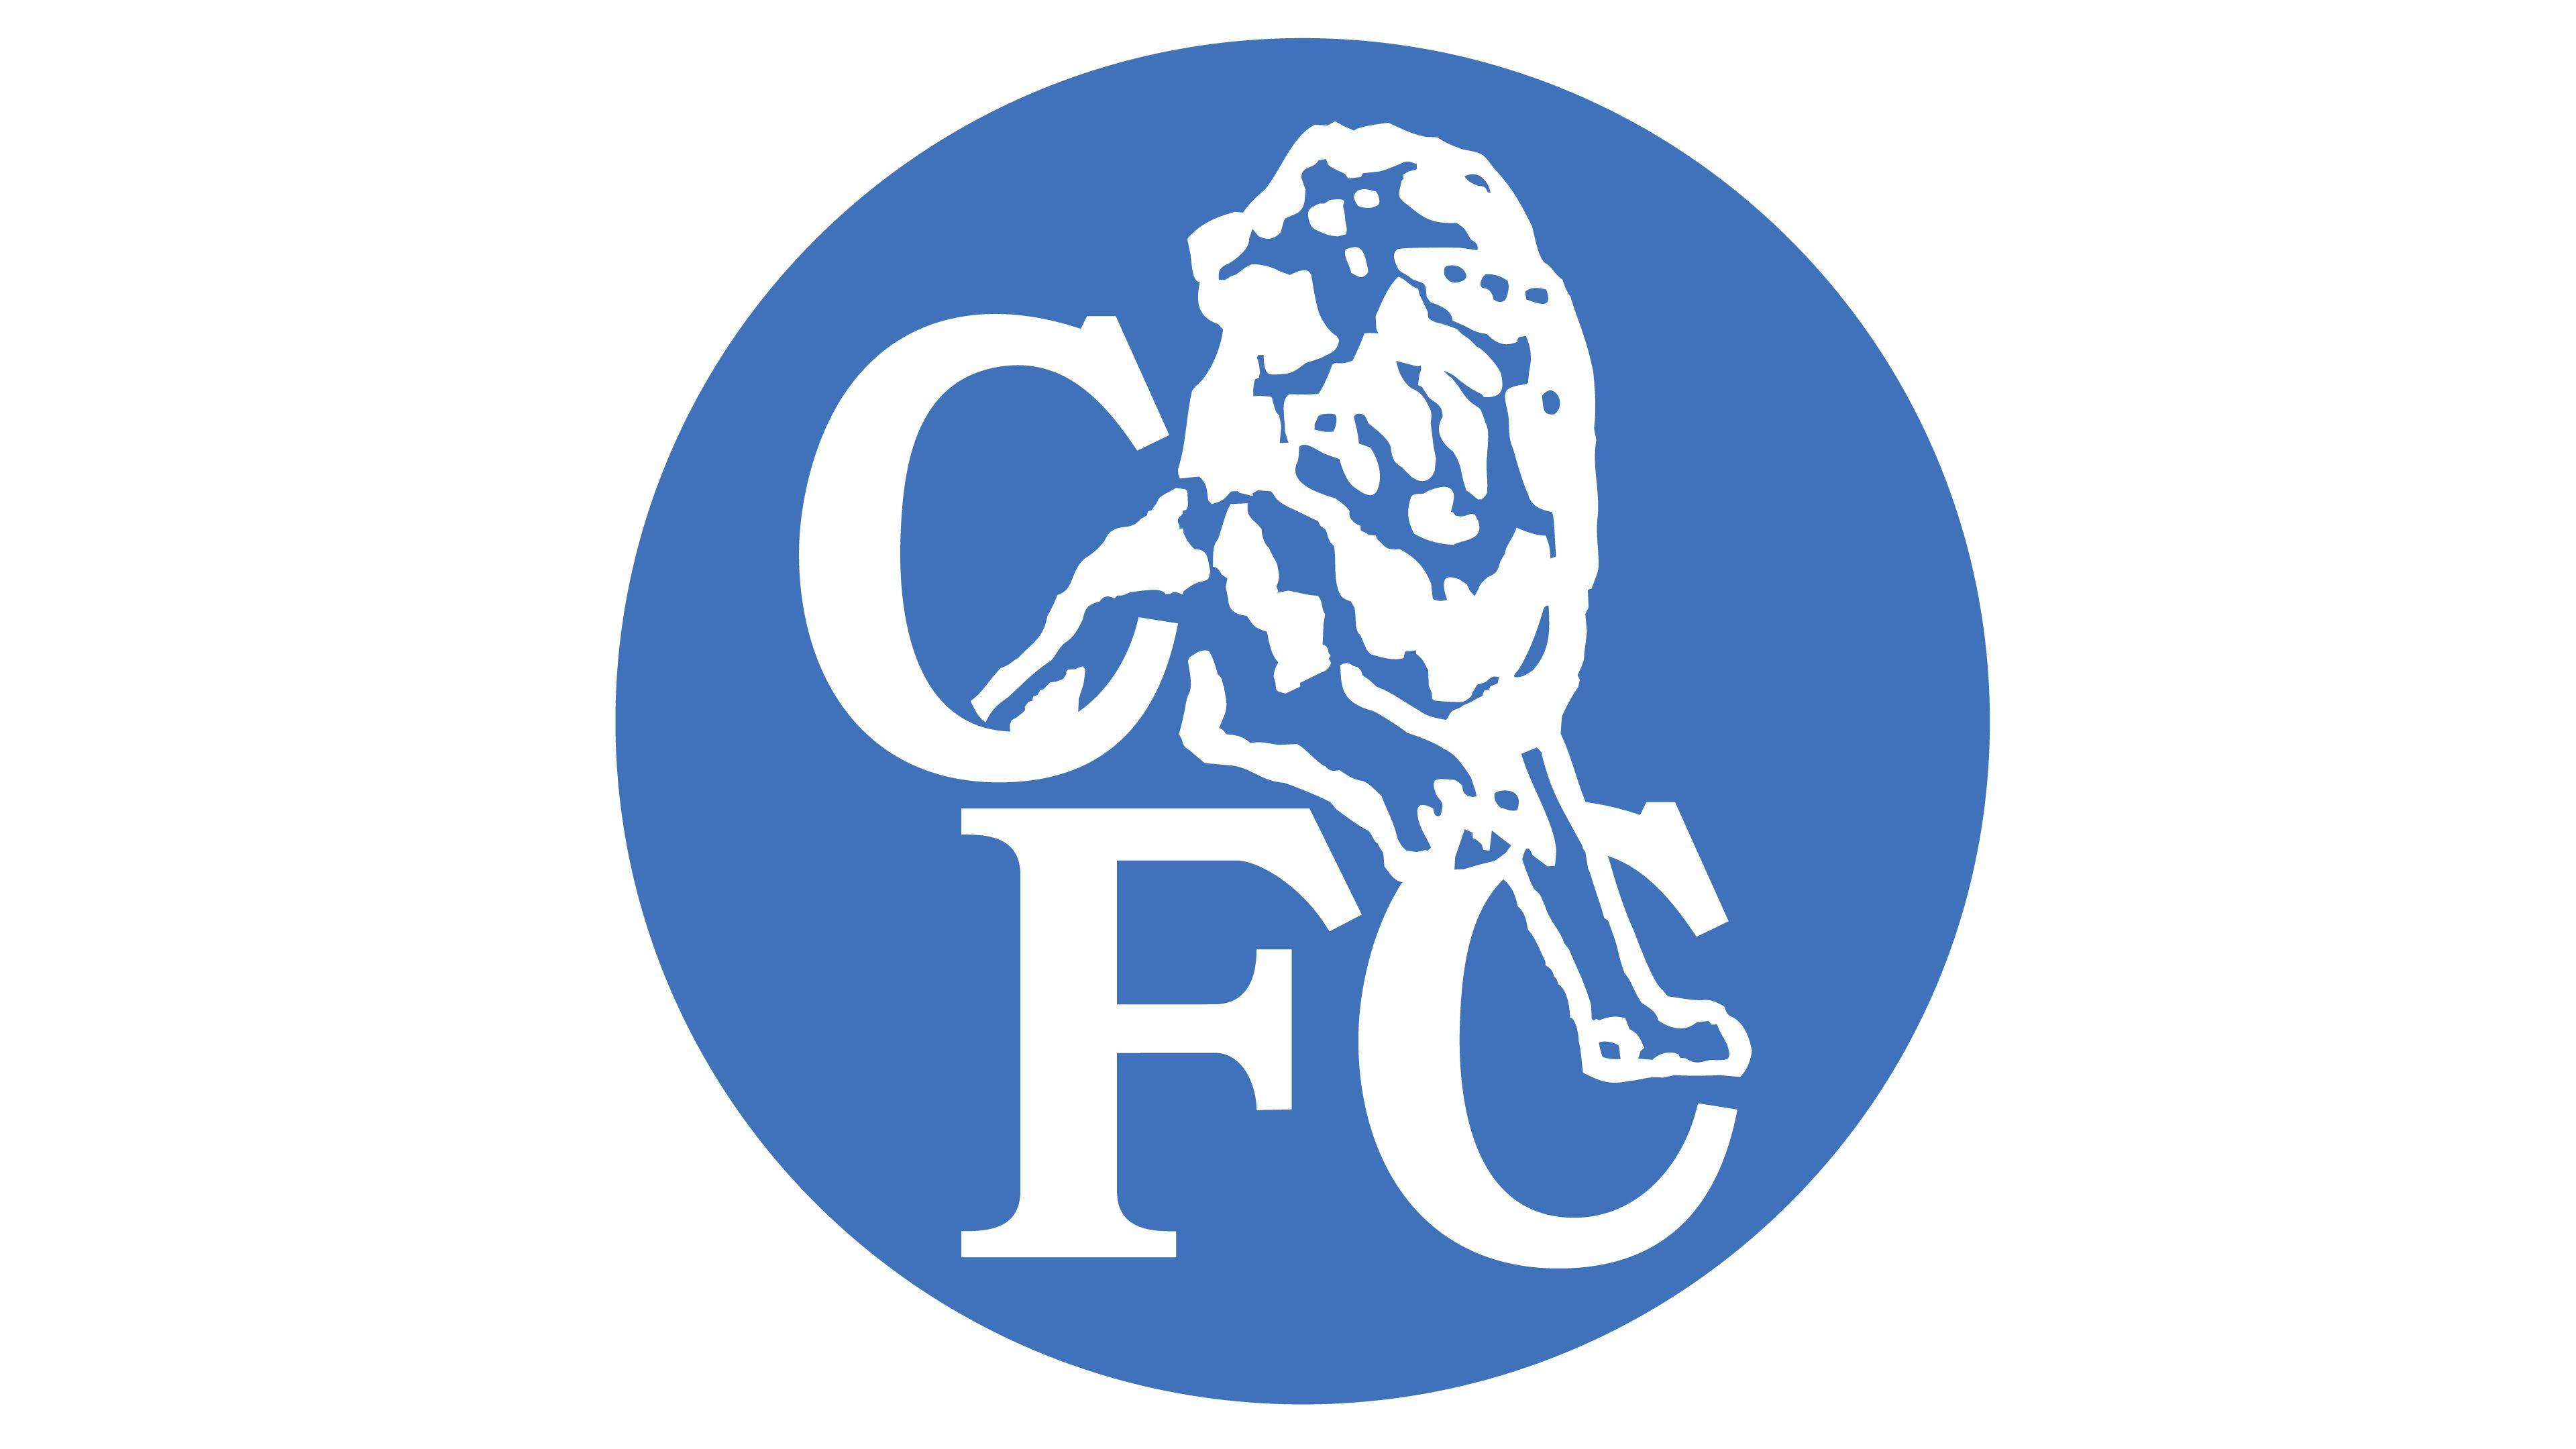 2003 Logo - Chelsea logo - Interesting History of the Team Name and emblem